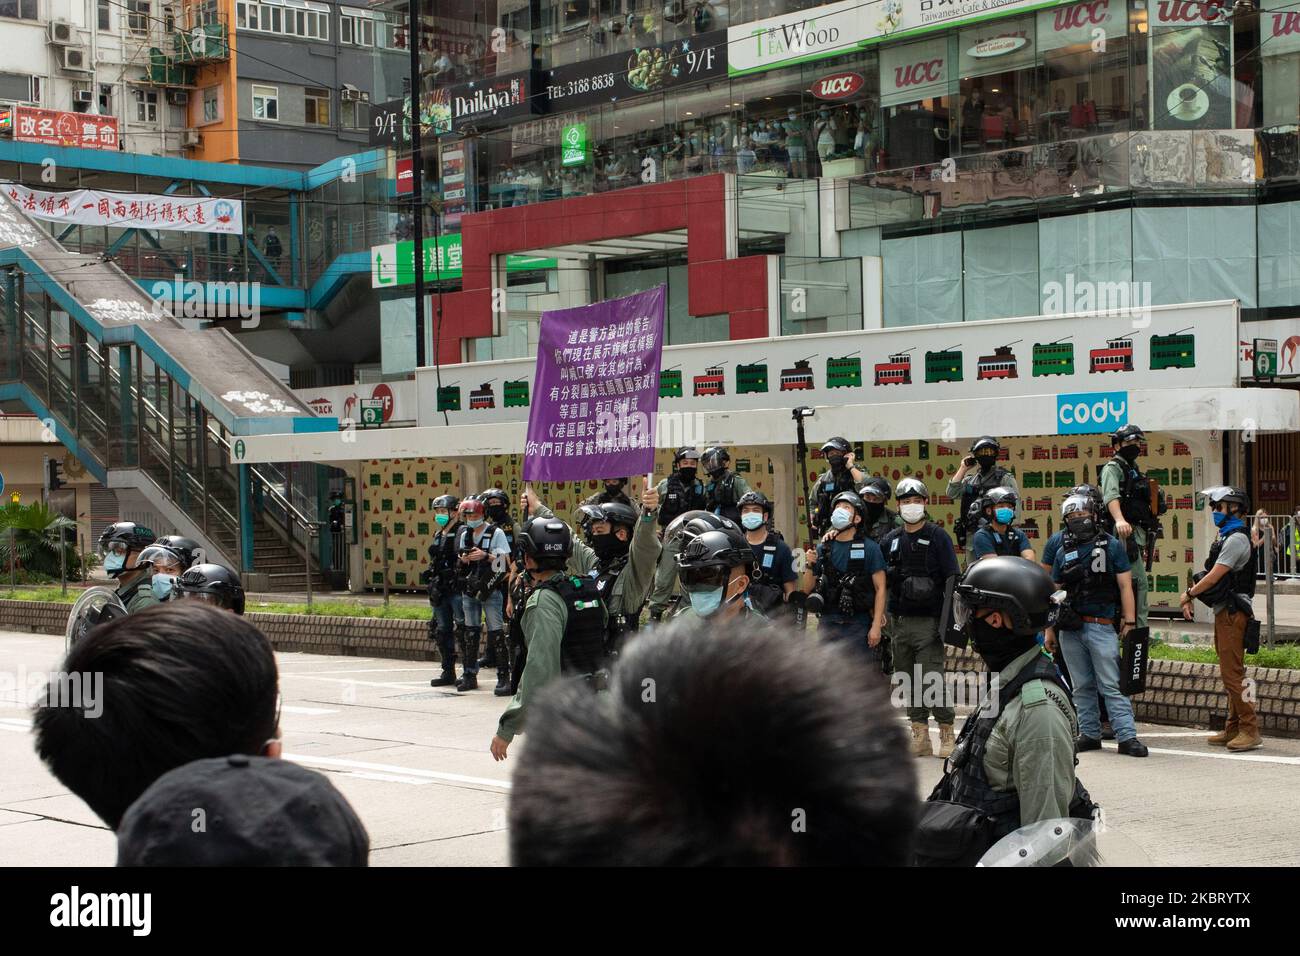 Hong Kong police raise a new purple flag indicating violation of the National Security Law in Hong Kong, China, on July 1, 2020. (Photo by Simon Jankowski/NurPhoto) Stock Photo